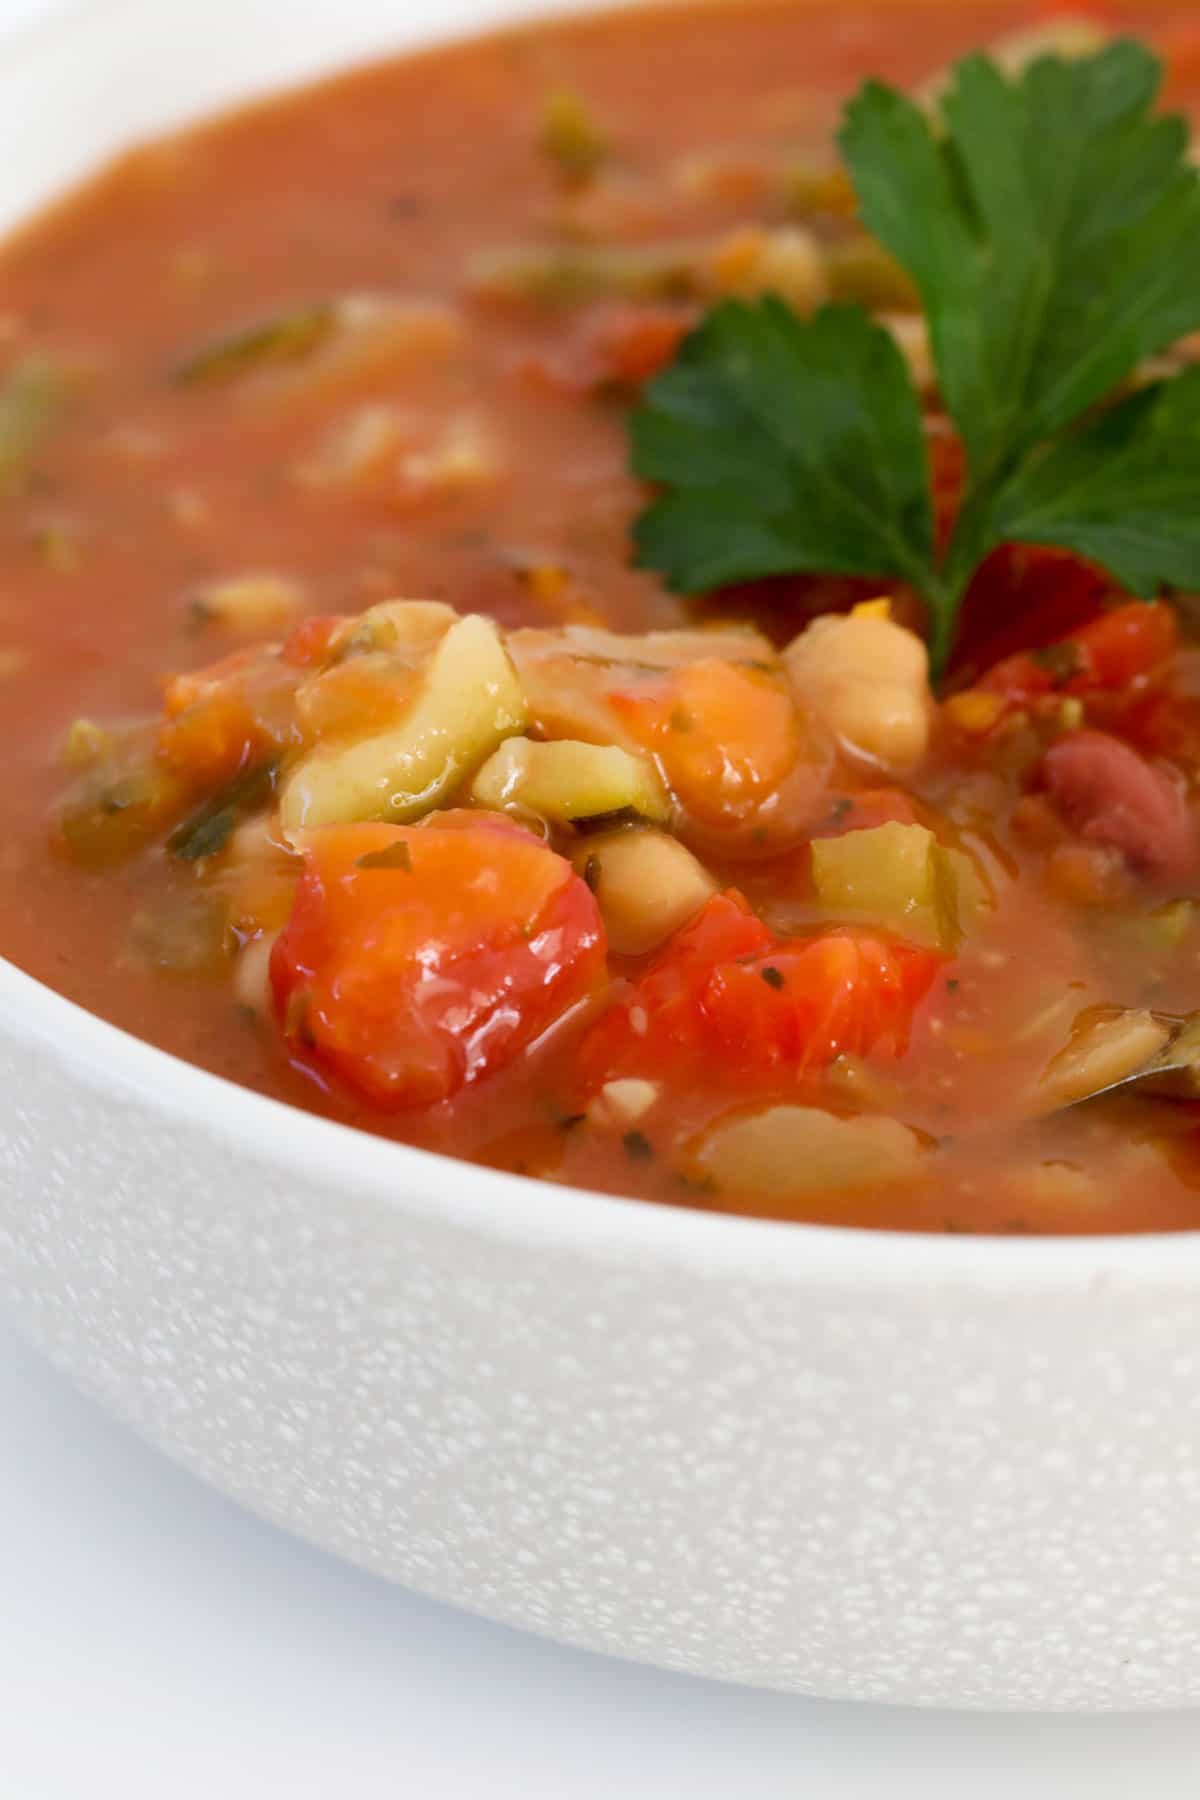 Beans and vegetables in a tomato based soup.